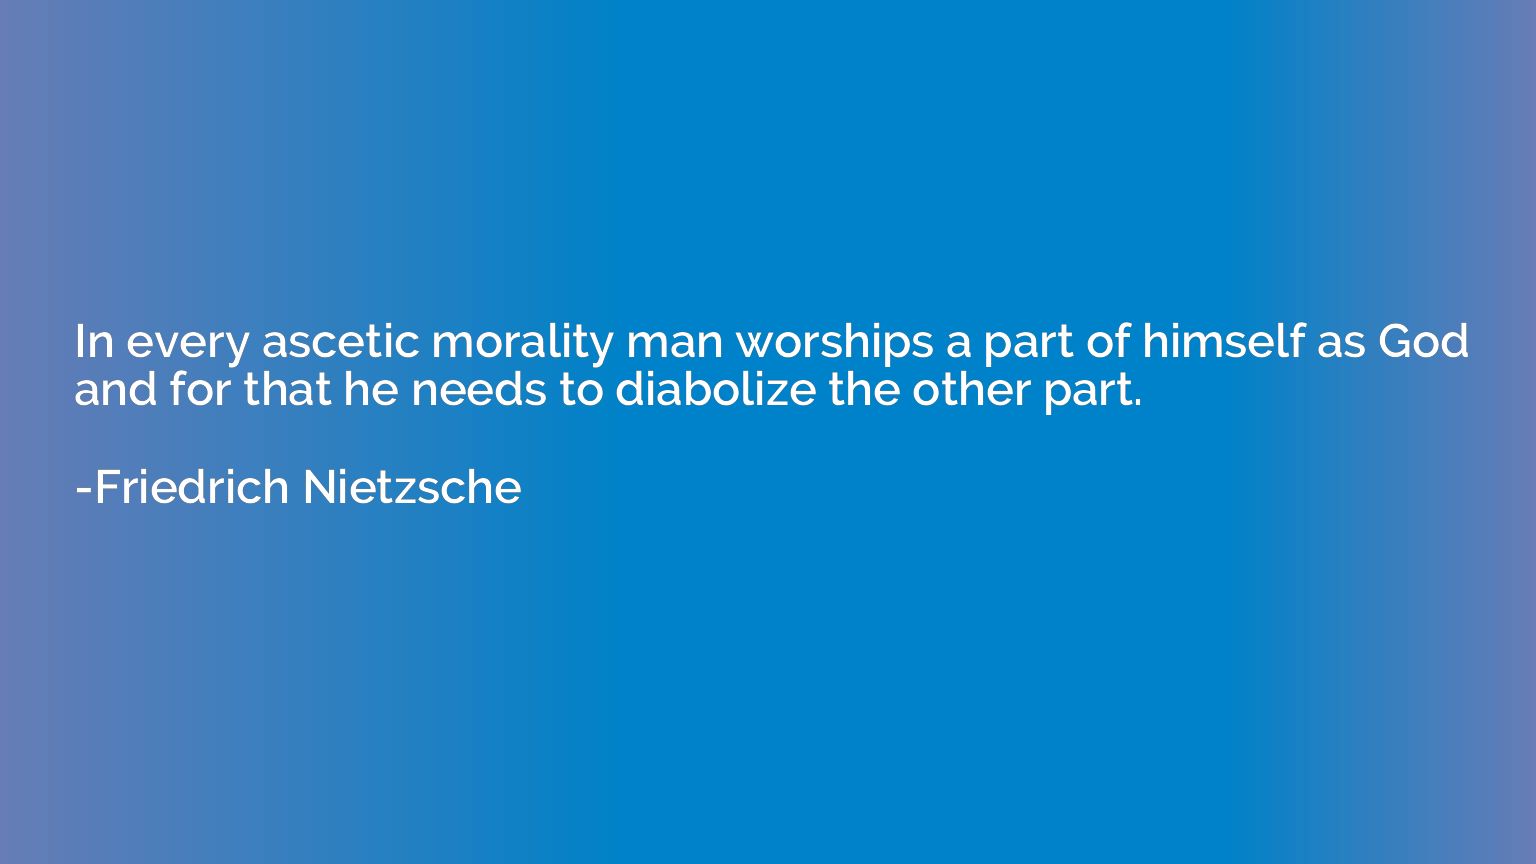 In every ascetic morality man worships a part of himself as 